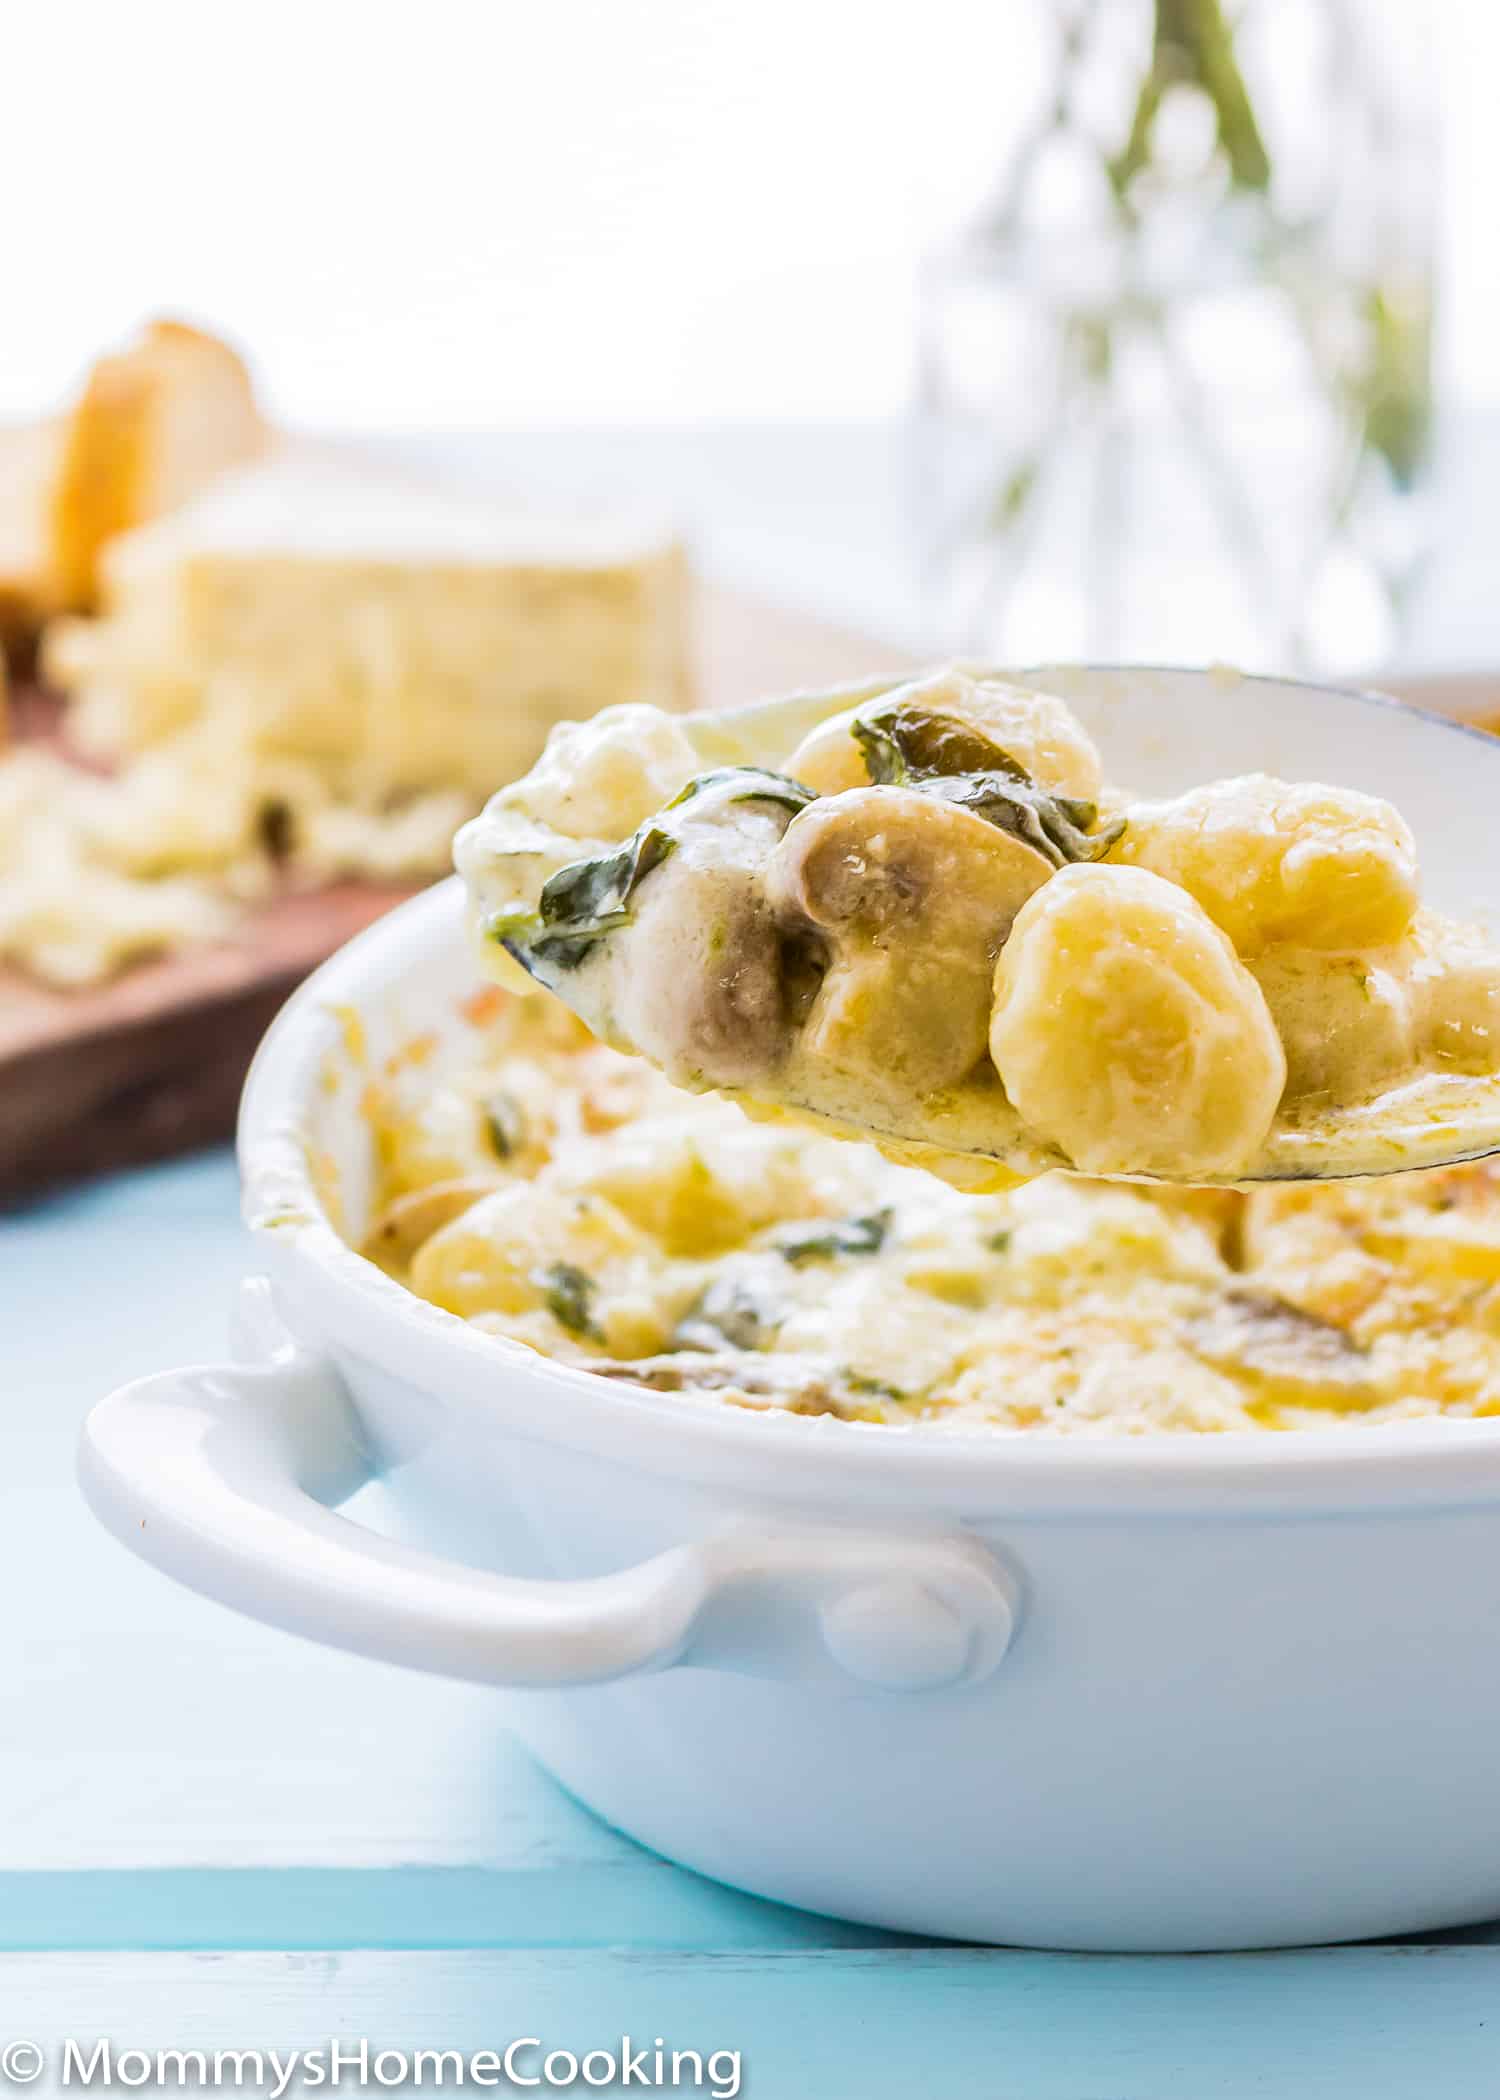 Cheesy Gnocchi and mushrooms in a serving spoon